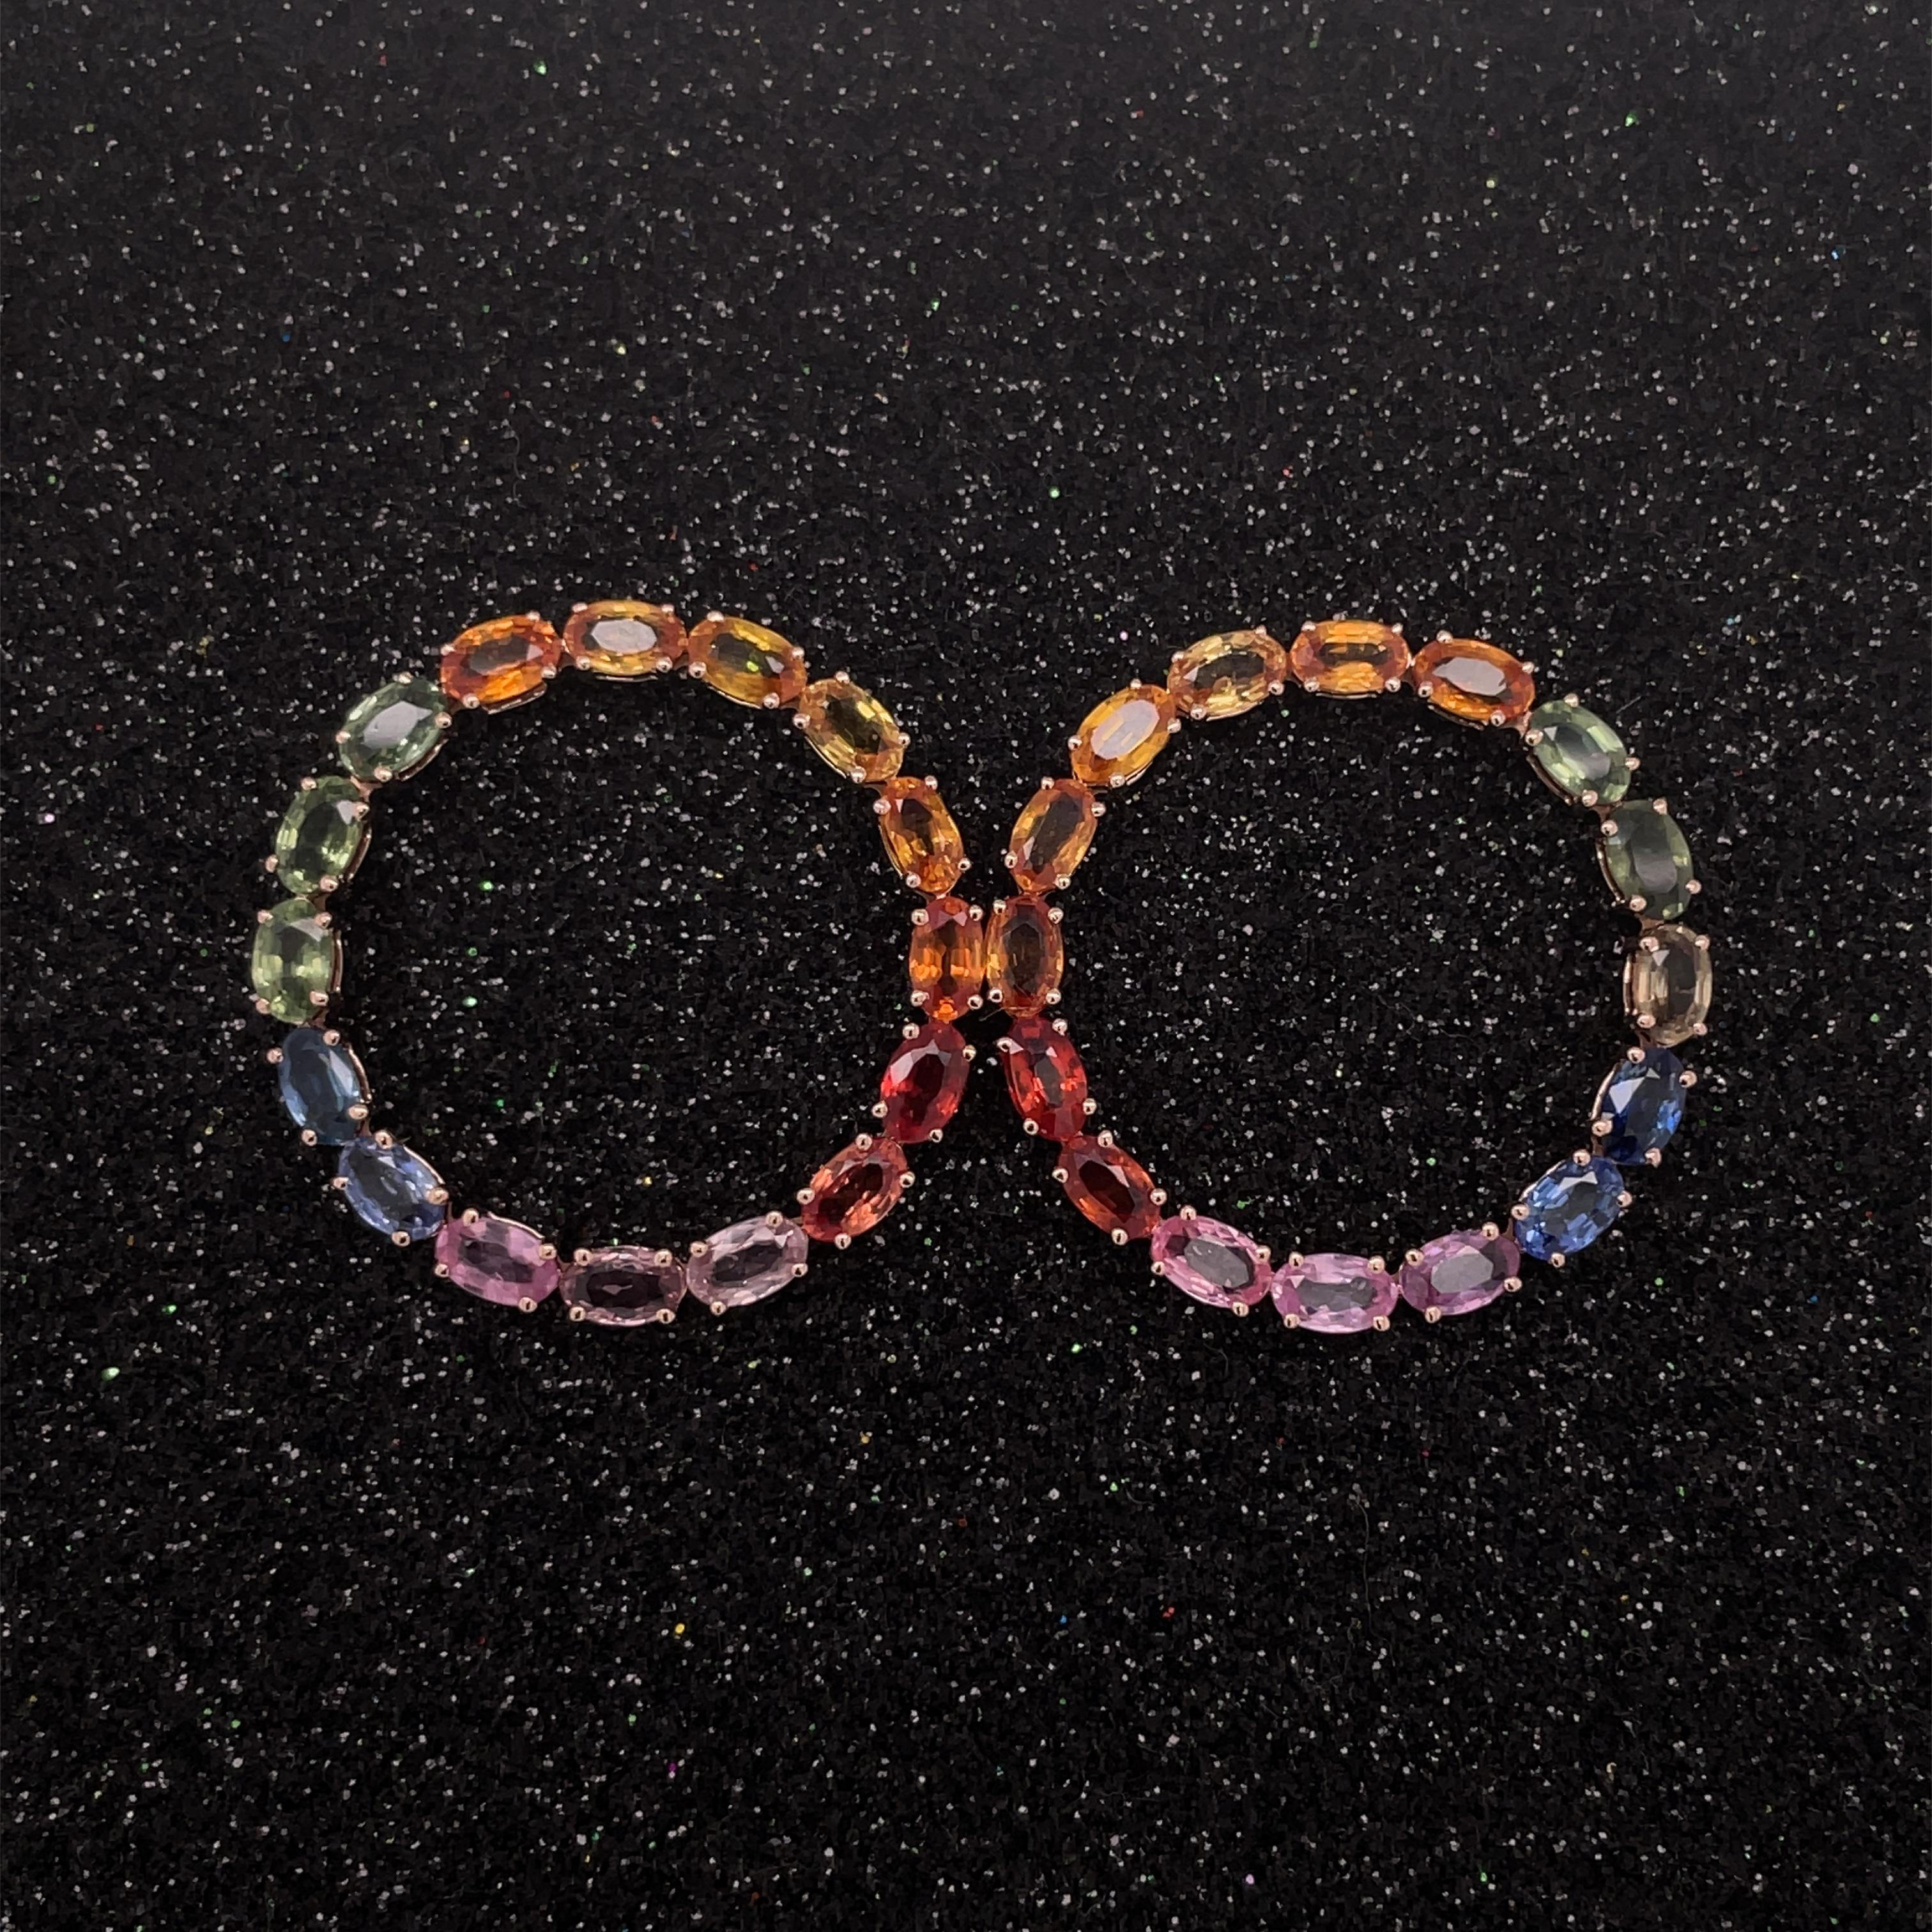 Stone : Yellow, Orange, Red, Blue, Pink and Green Sapphire
Type : Natural
Earring Weight-  5.48 gms
Shape : Oval
Size : 5x3 mm
Weight : 9.34 Carats
Metal : Rose Gold
Enhancement : Heated

Please allow 5-10% fluctuation in stone weight & gold weight